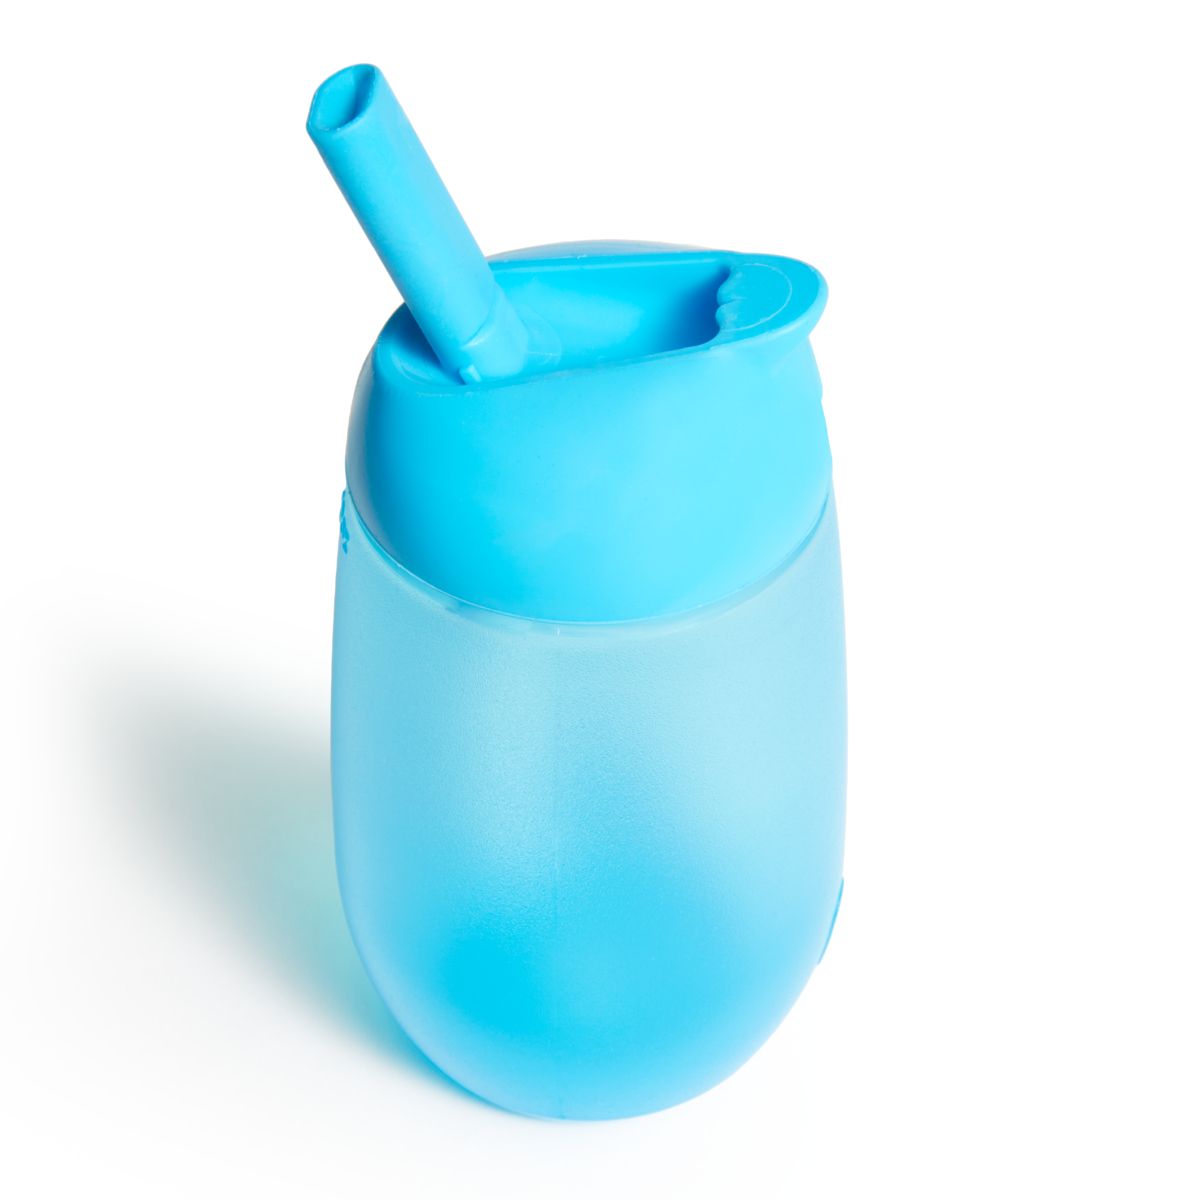 MUNCHKIN Simple Clean Straw Cup - Blue/Pink